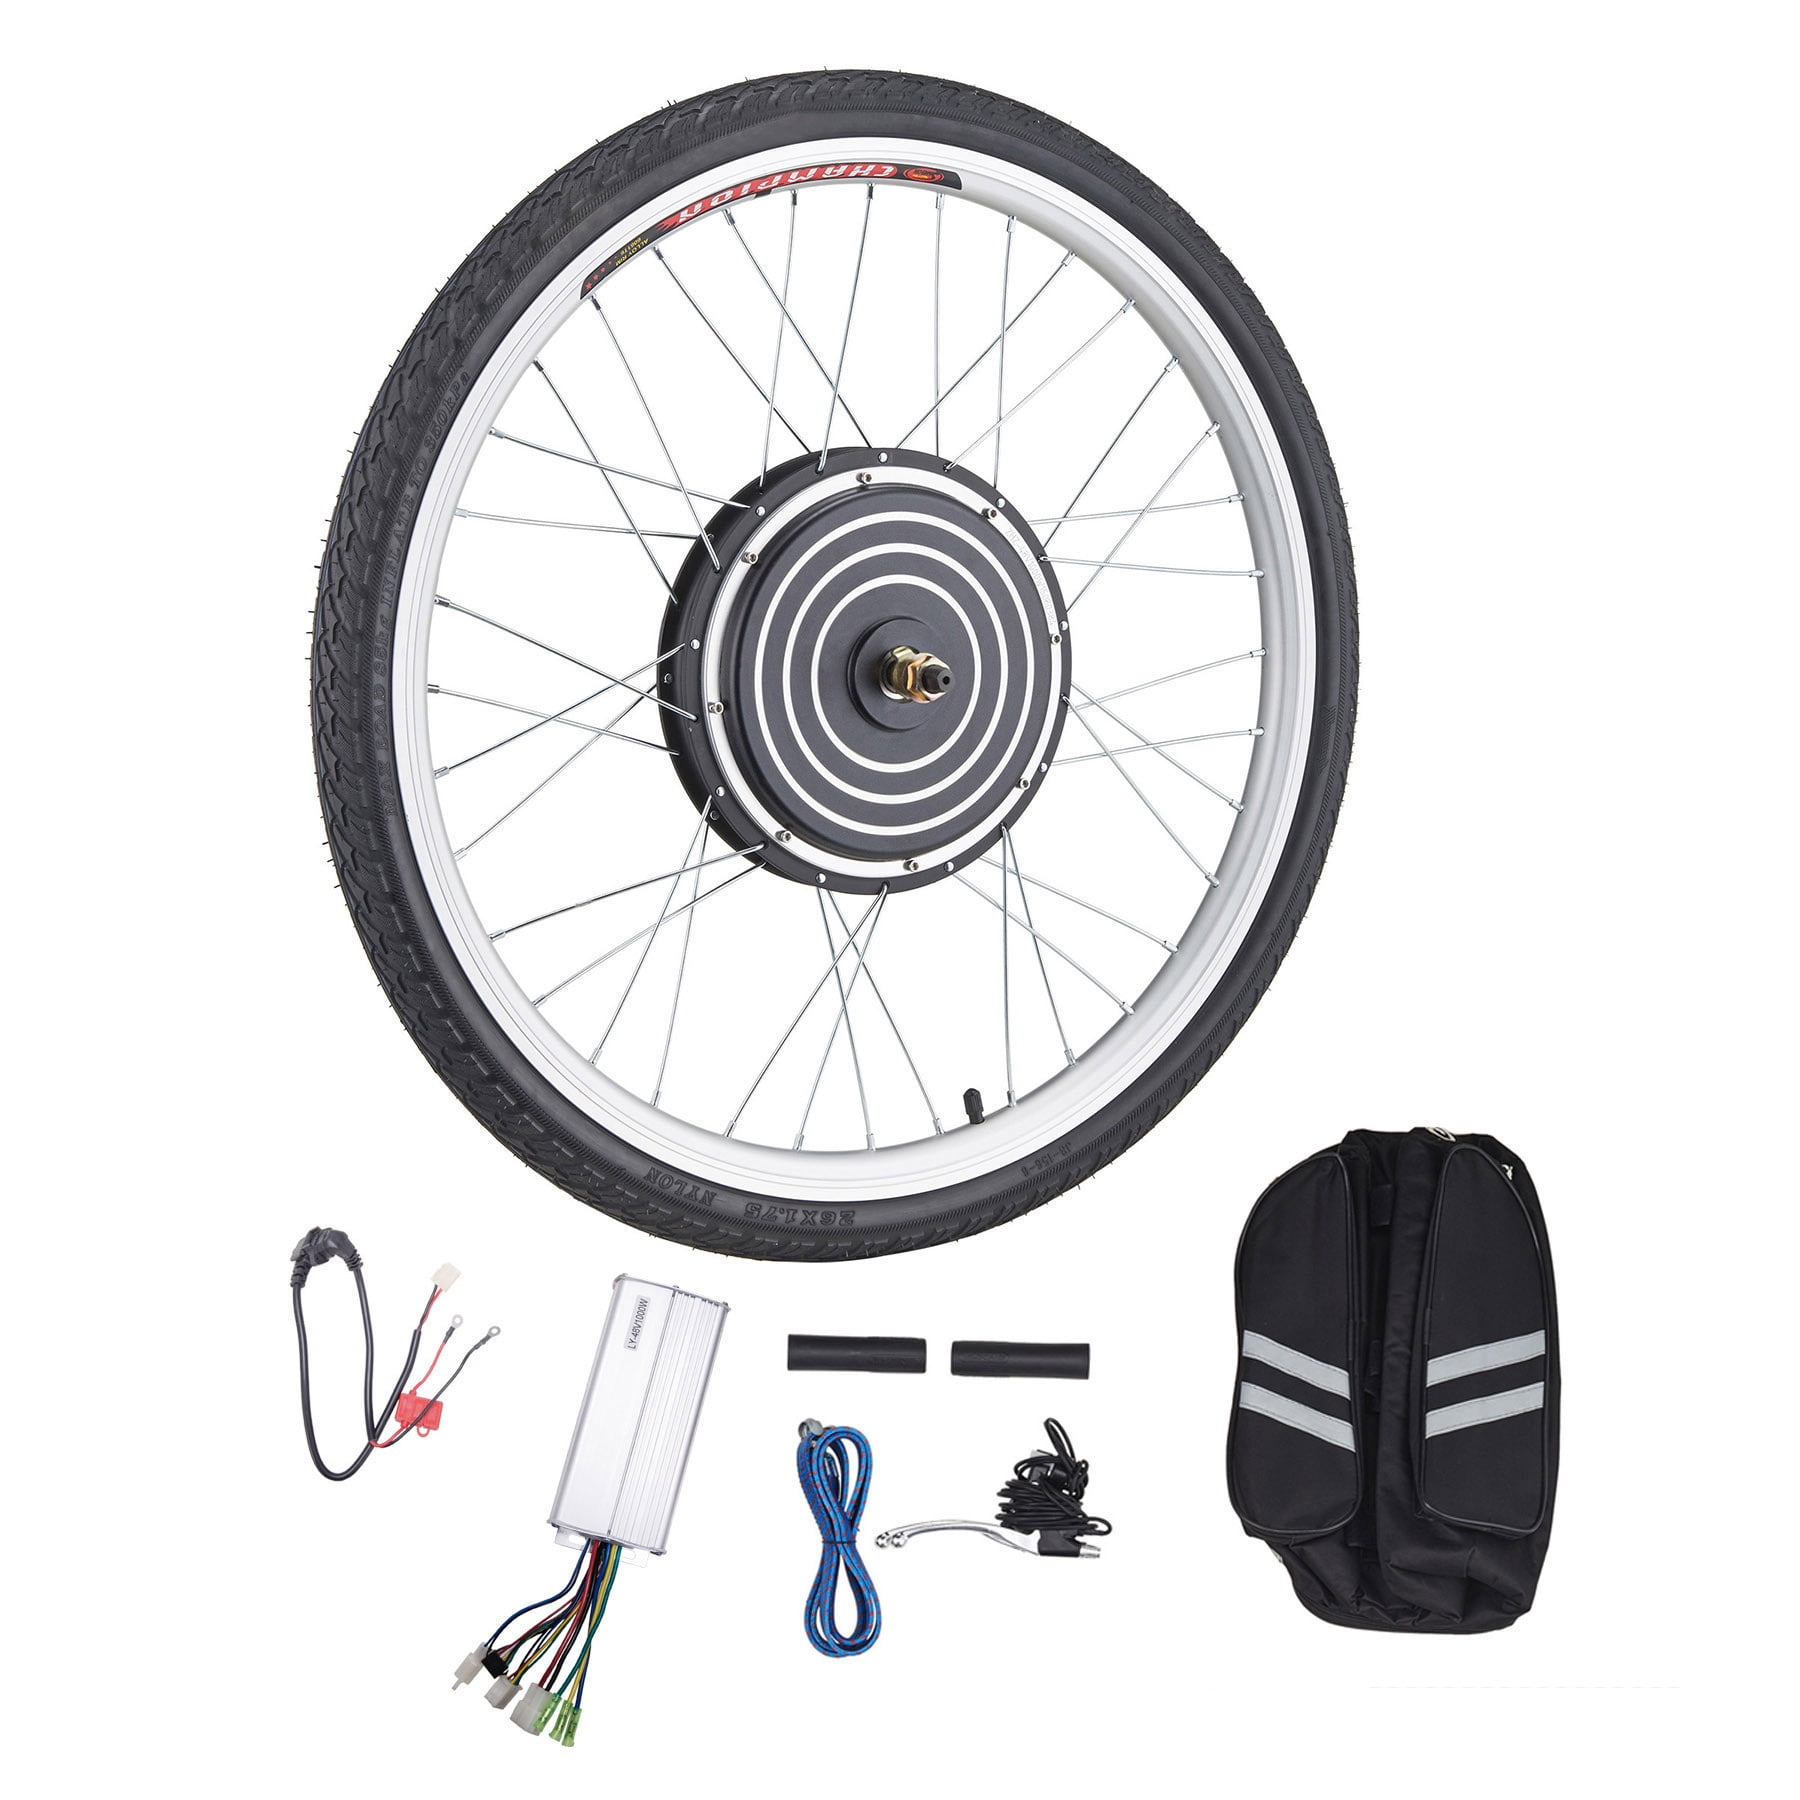 Ebike Conversion Motor Engine Wheel Kit 36V 26" Electric Bicycle With Battery US 